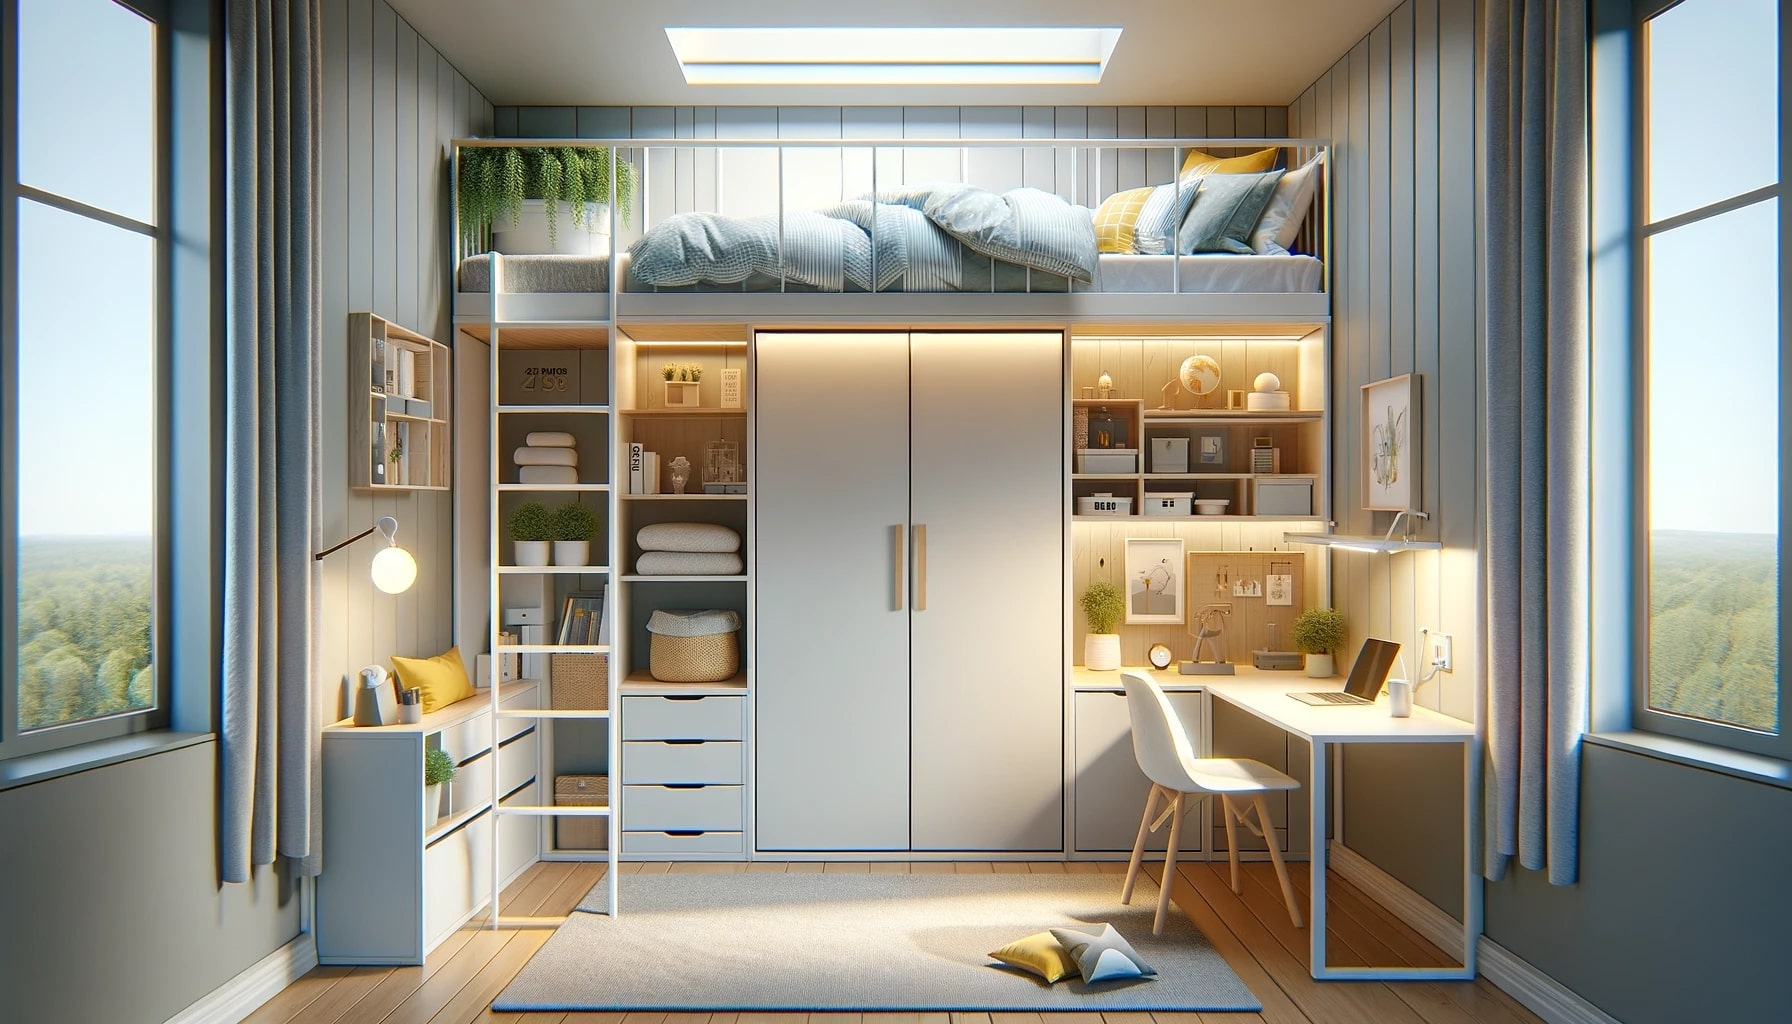 A small bedroom with an IKEA loft bed and desk, maximizing small spaces with clever furniture solutions.